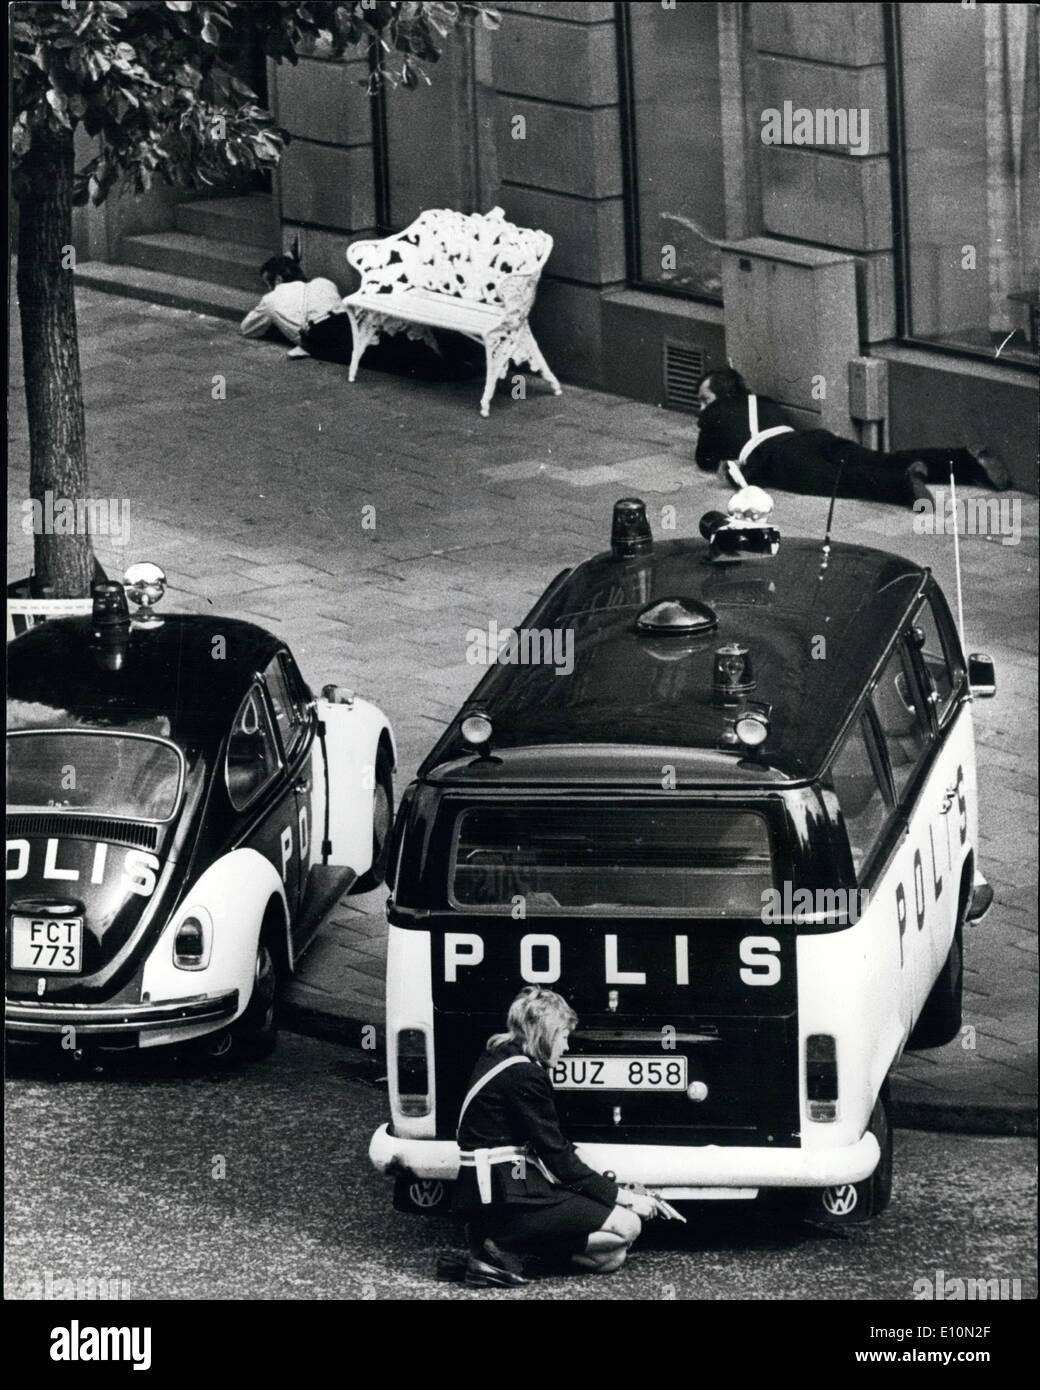 Aug. 08, 1973 - Gunman Holds Hostages In Stockholm Bank. A policewoman, gun in hand (foreground) crouches behind a police van, outside the bank in Stockholm where a gunman is holding four hostages. The gunman is holding the hostage captive in a vault in the bank. Stock Photo